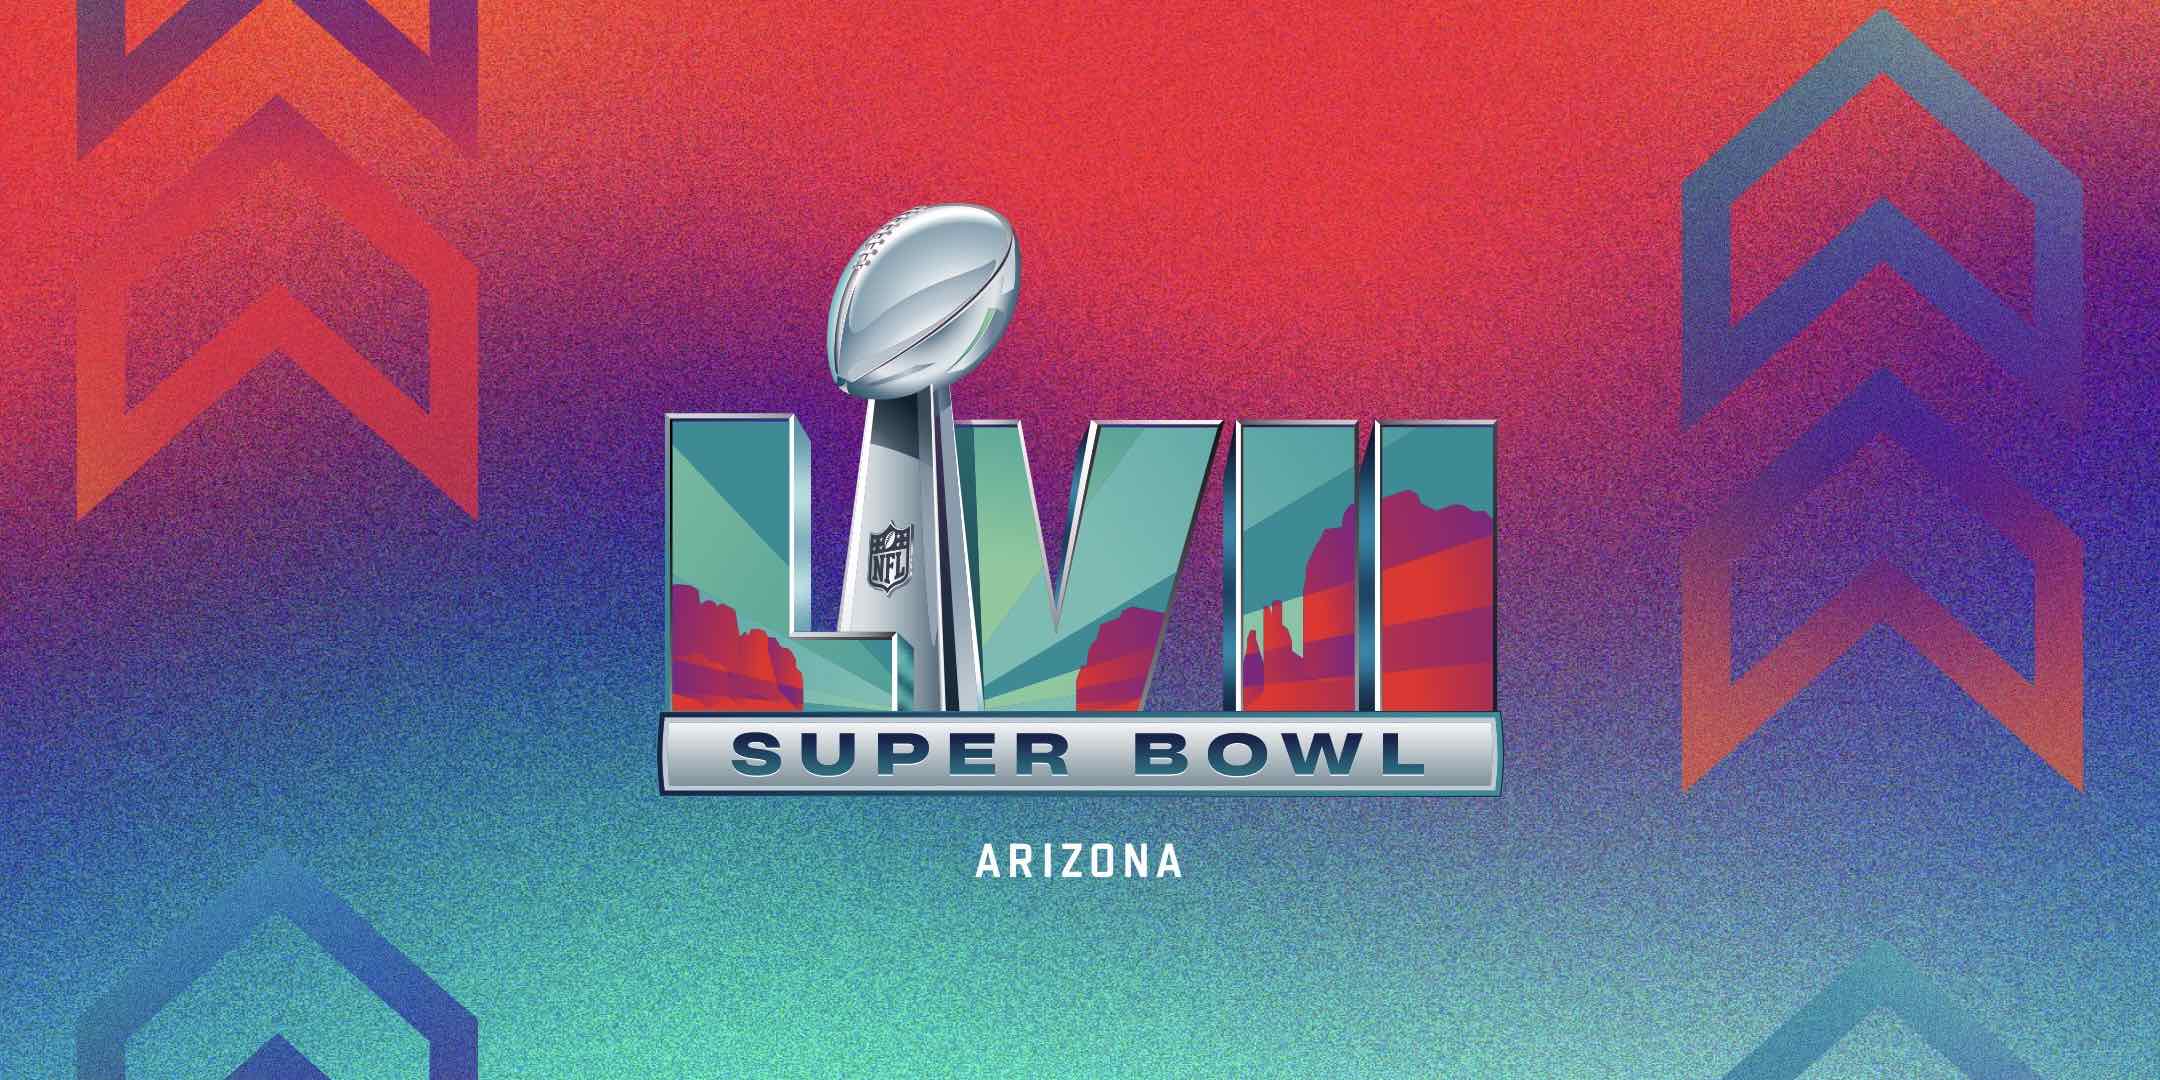 Super Bowl Archives 9to5Mac